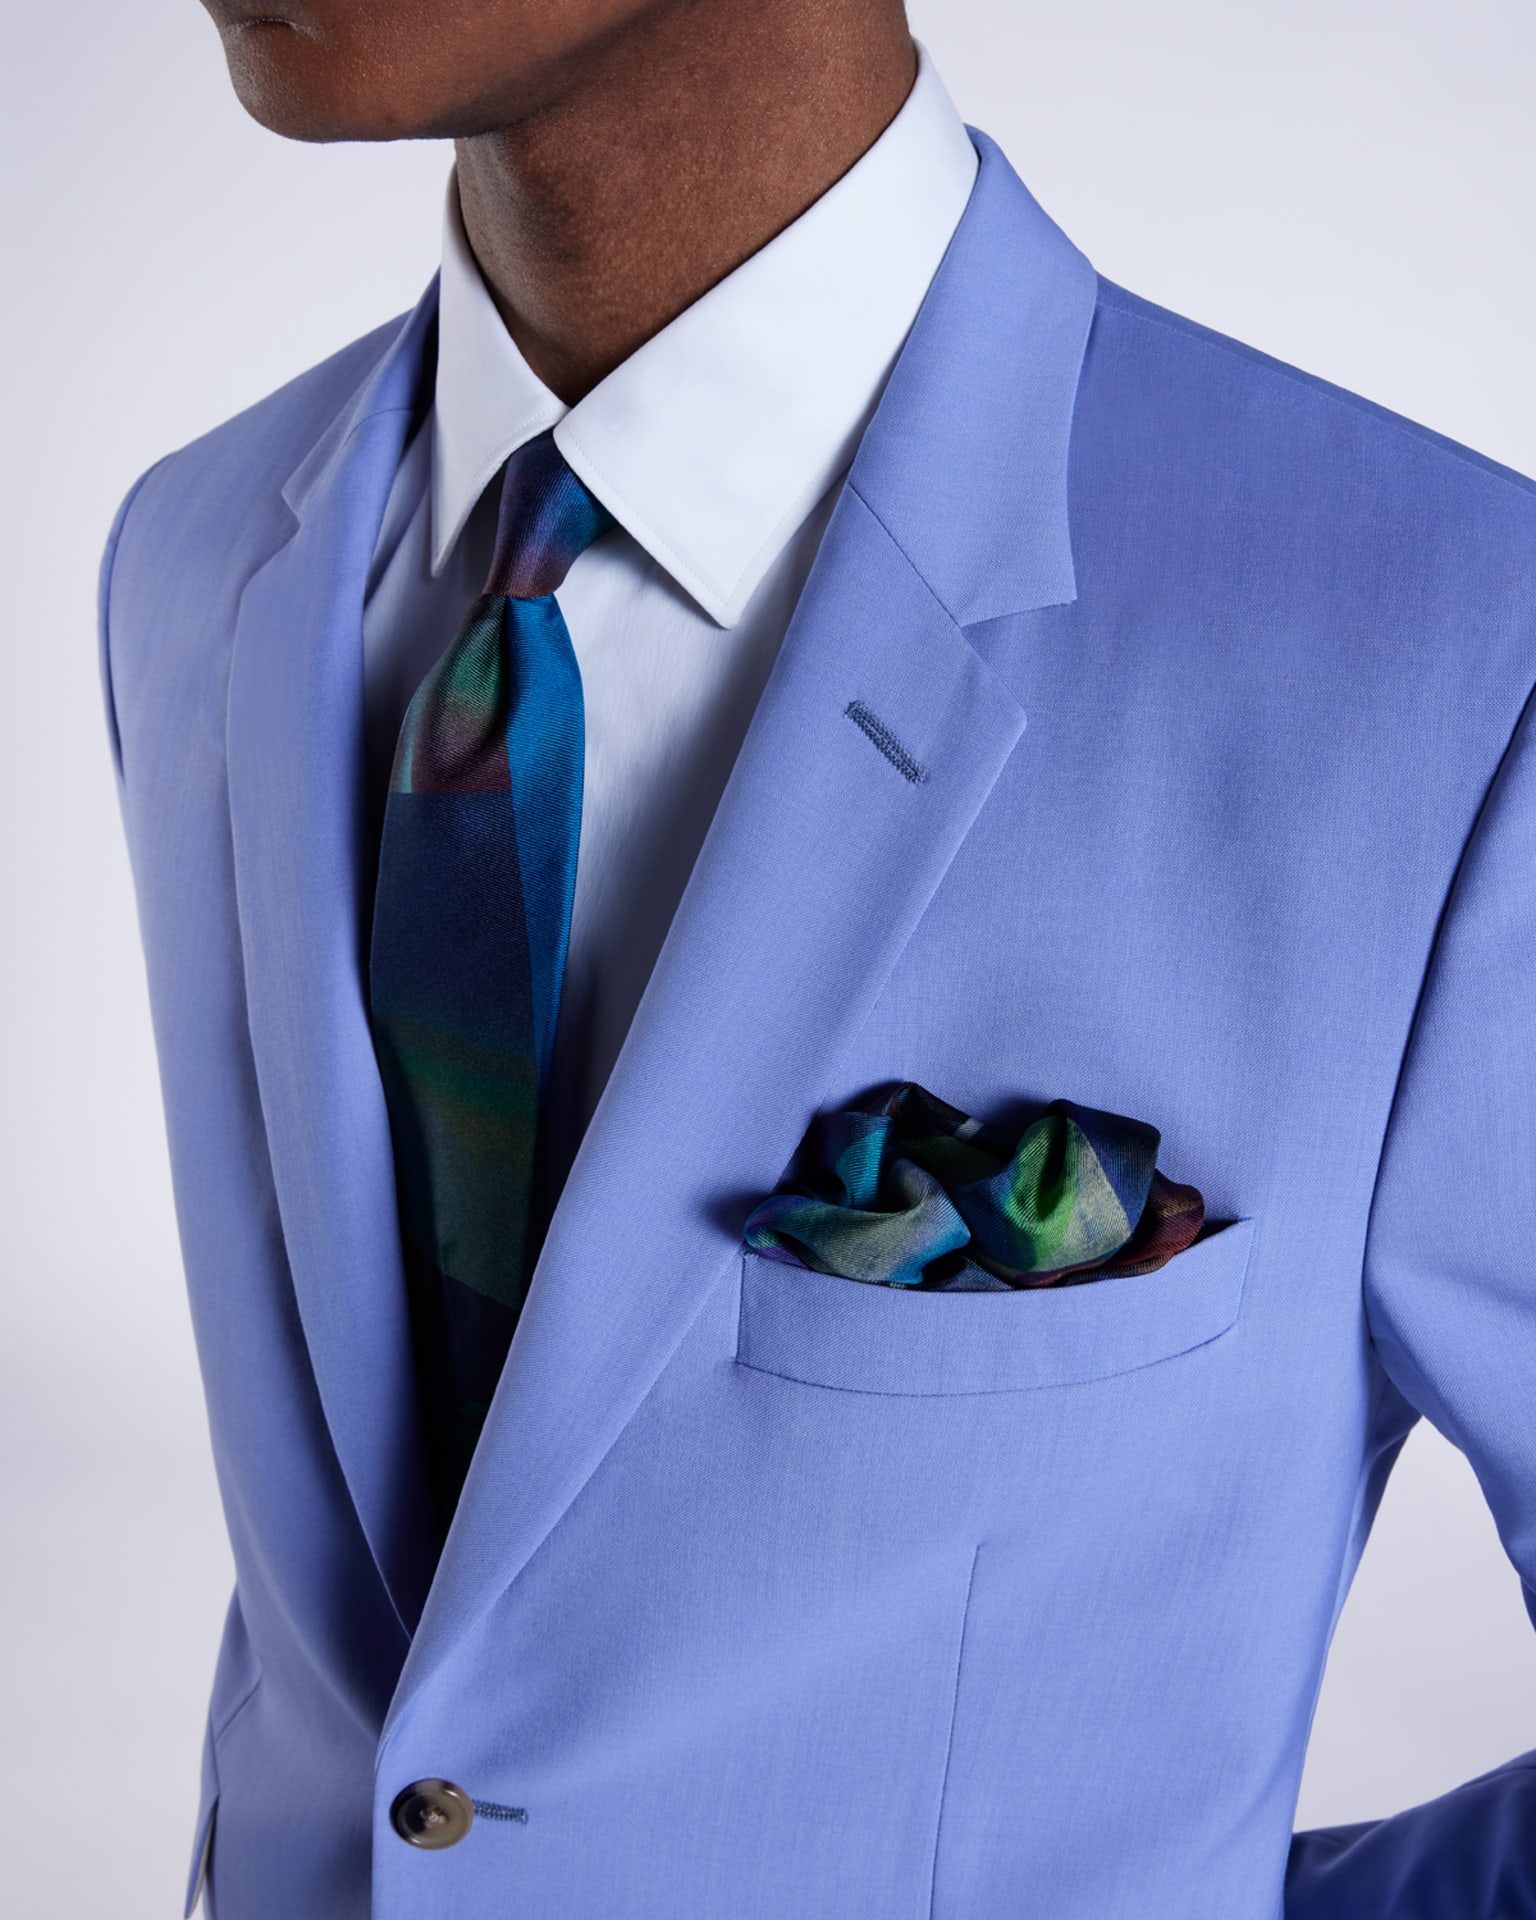 a male model wearing a light blue wedding suit jacket, white shirt and colourful patterned statement tie with matching pocket square